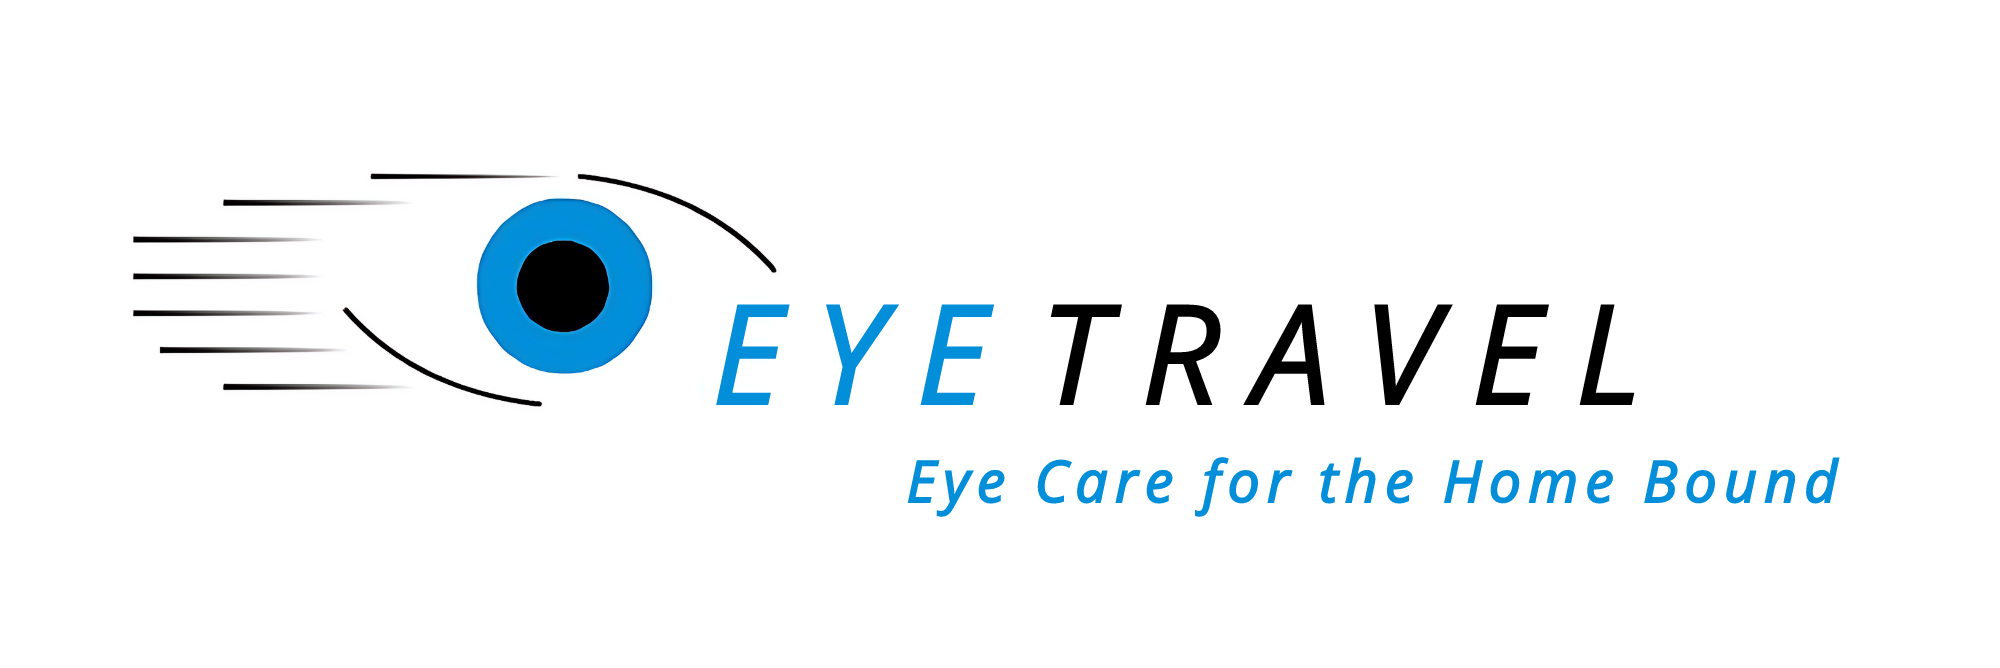 Eye Travel: Eye Care for the Home Bound